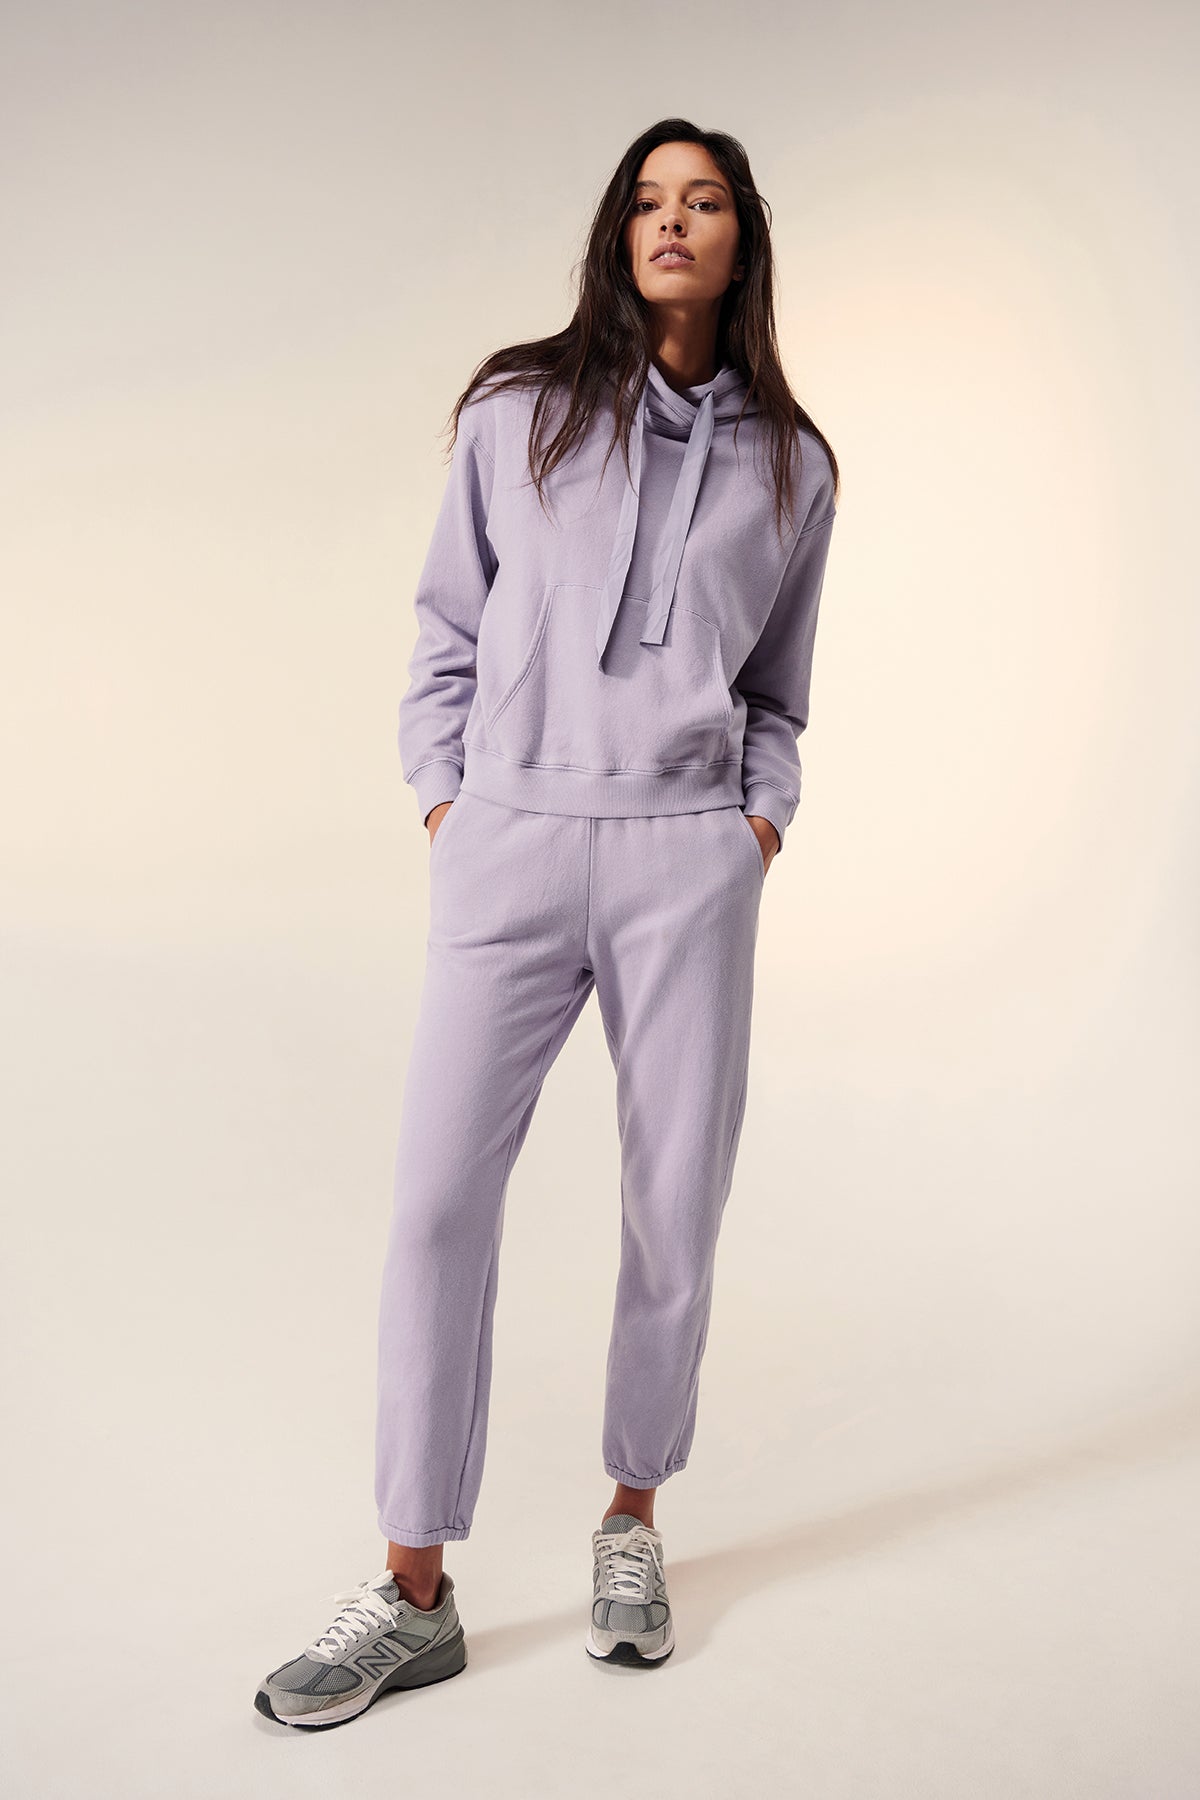 Cinch Bottom Sweatpants for Women with Pockets - China Sweatpants and  Clothing price